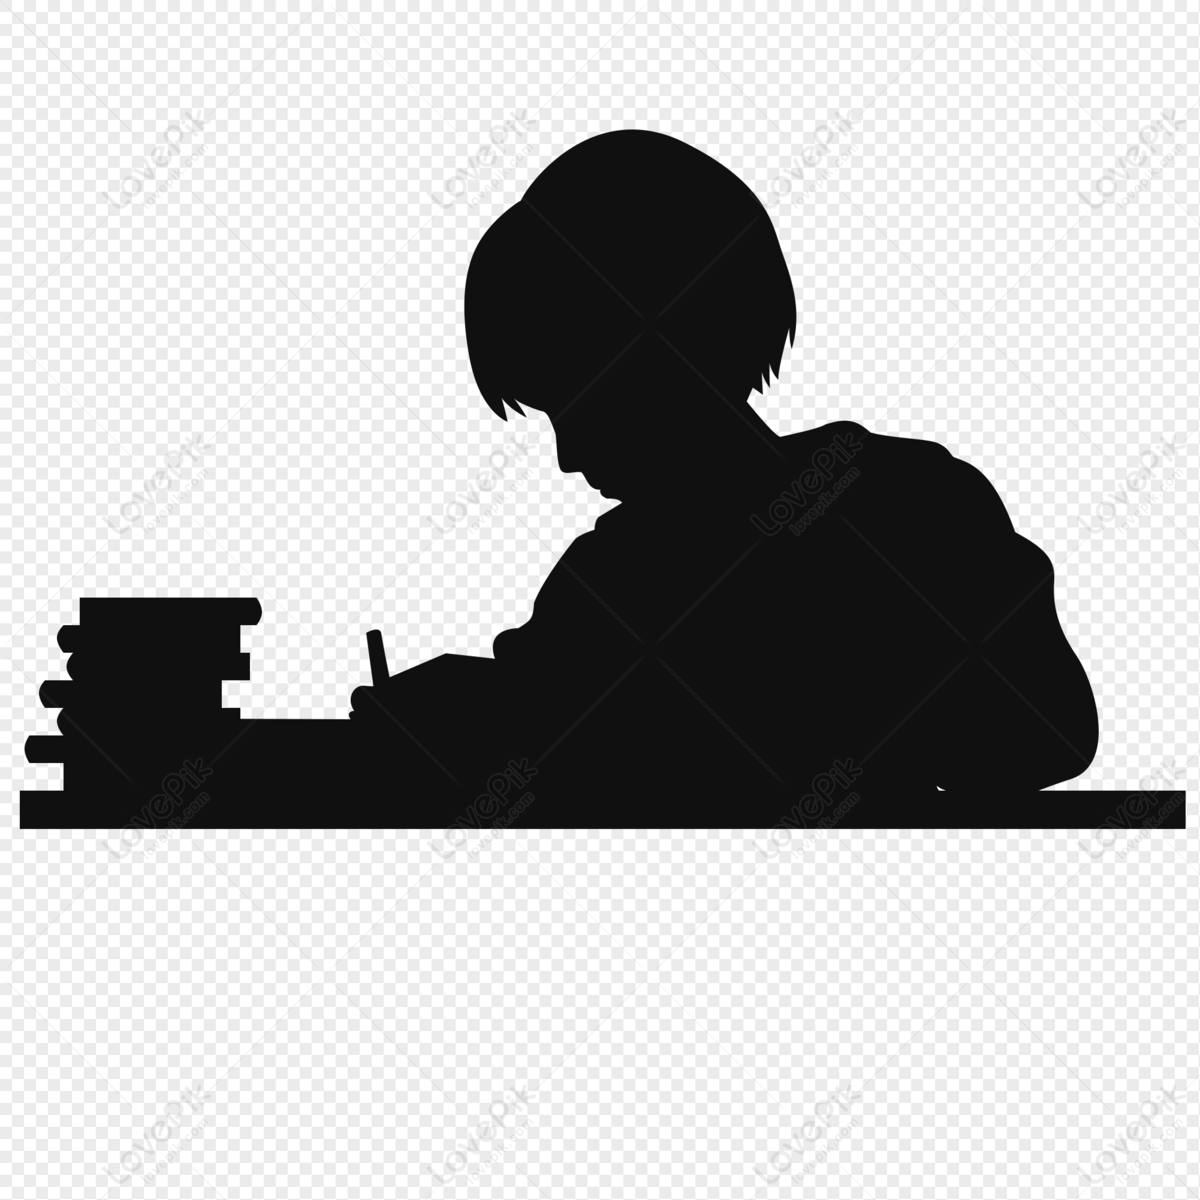 Student silhouette in review, student, preparing for exams, silhouette png hd transparent image